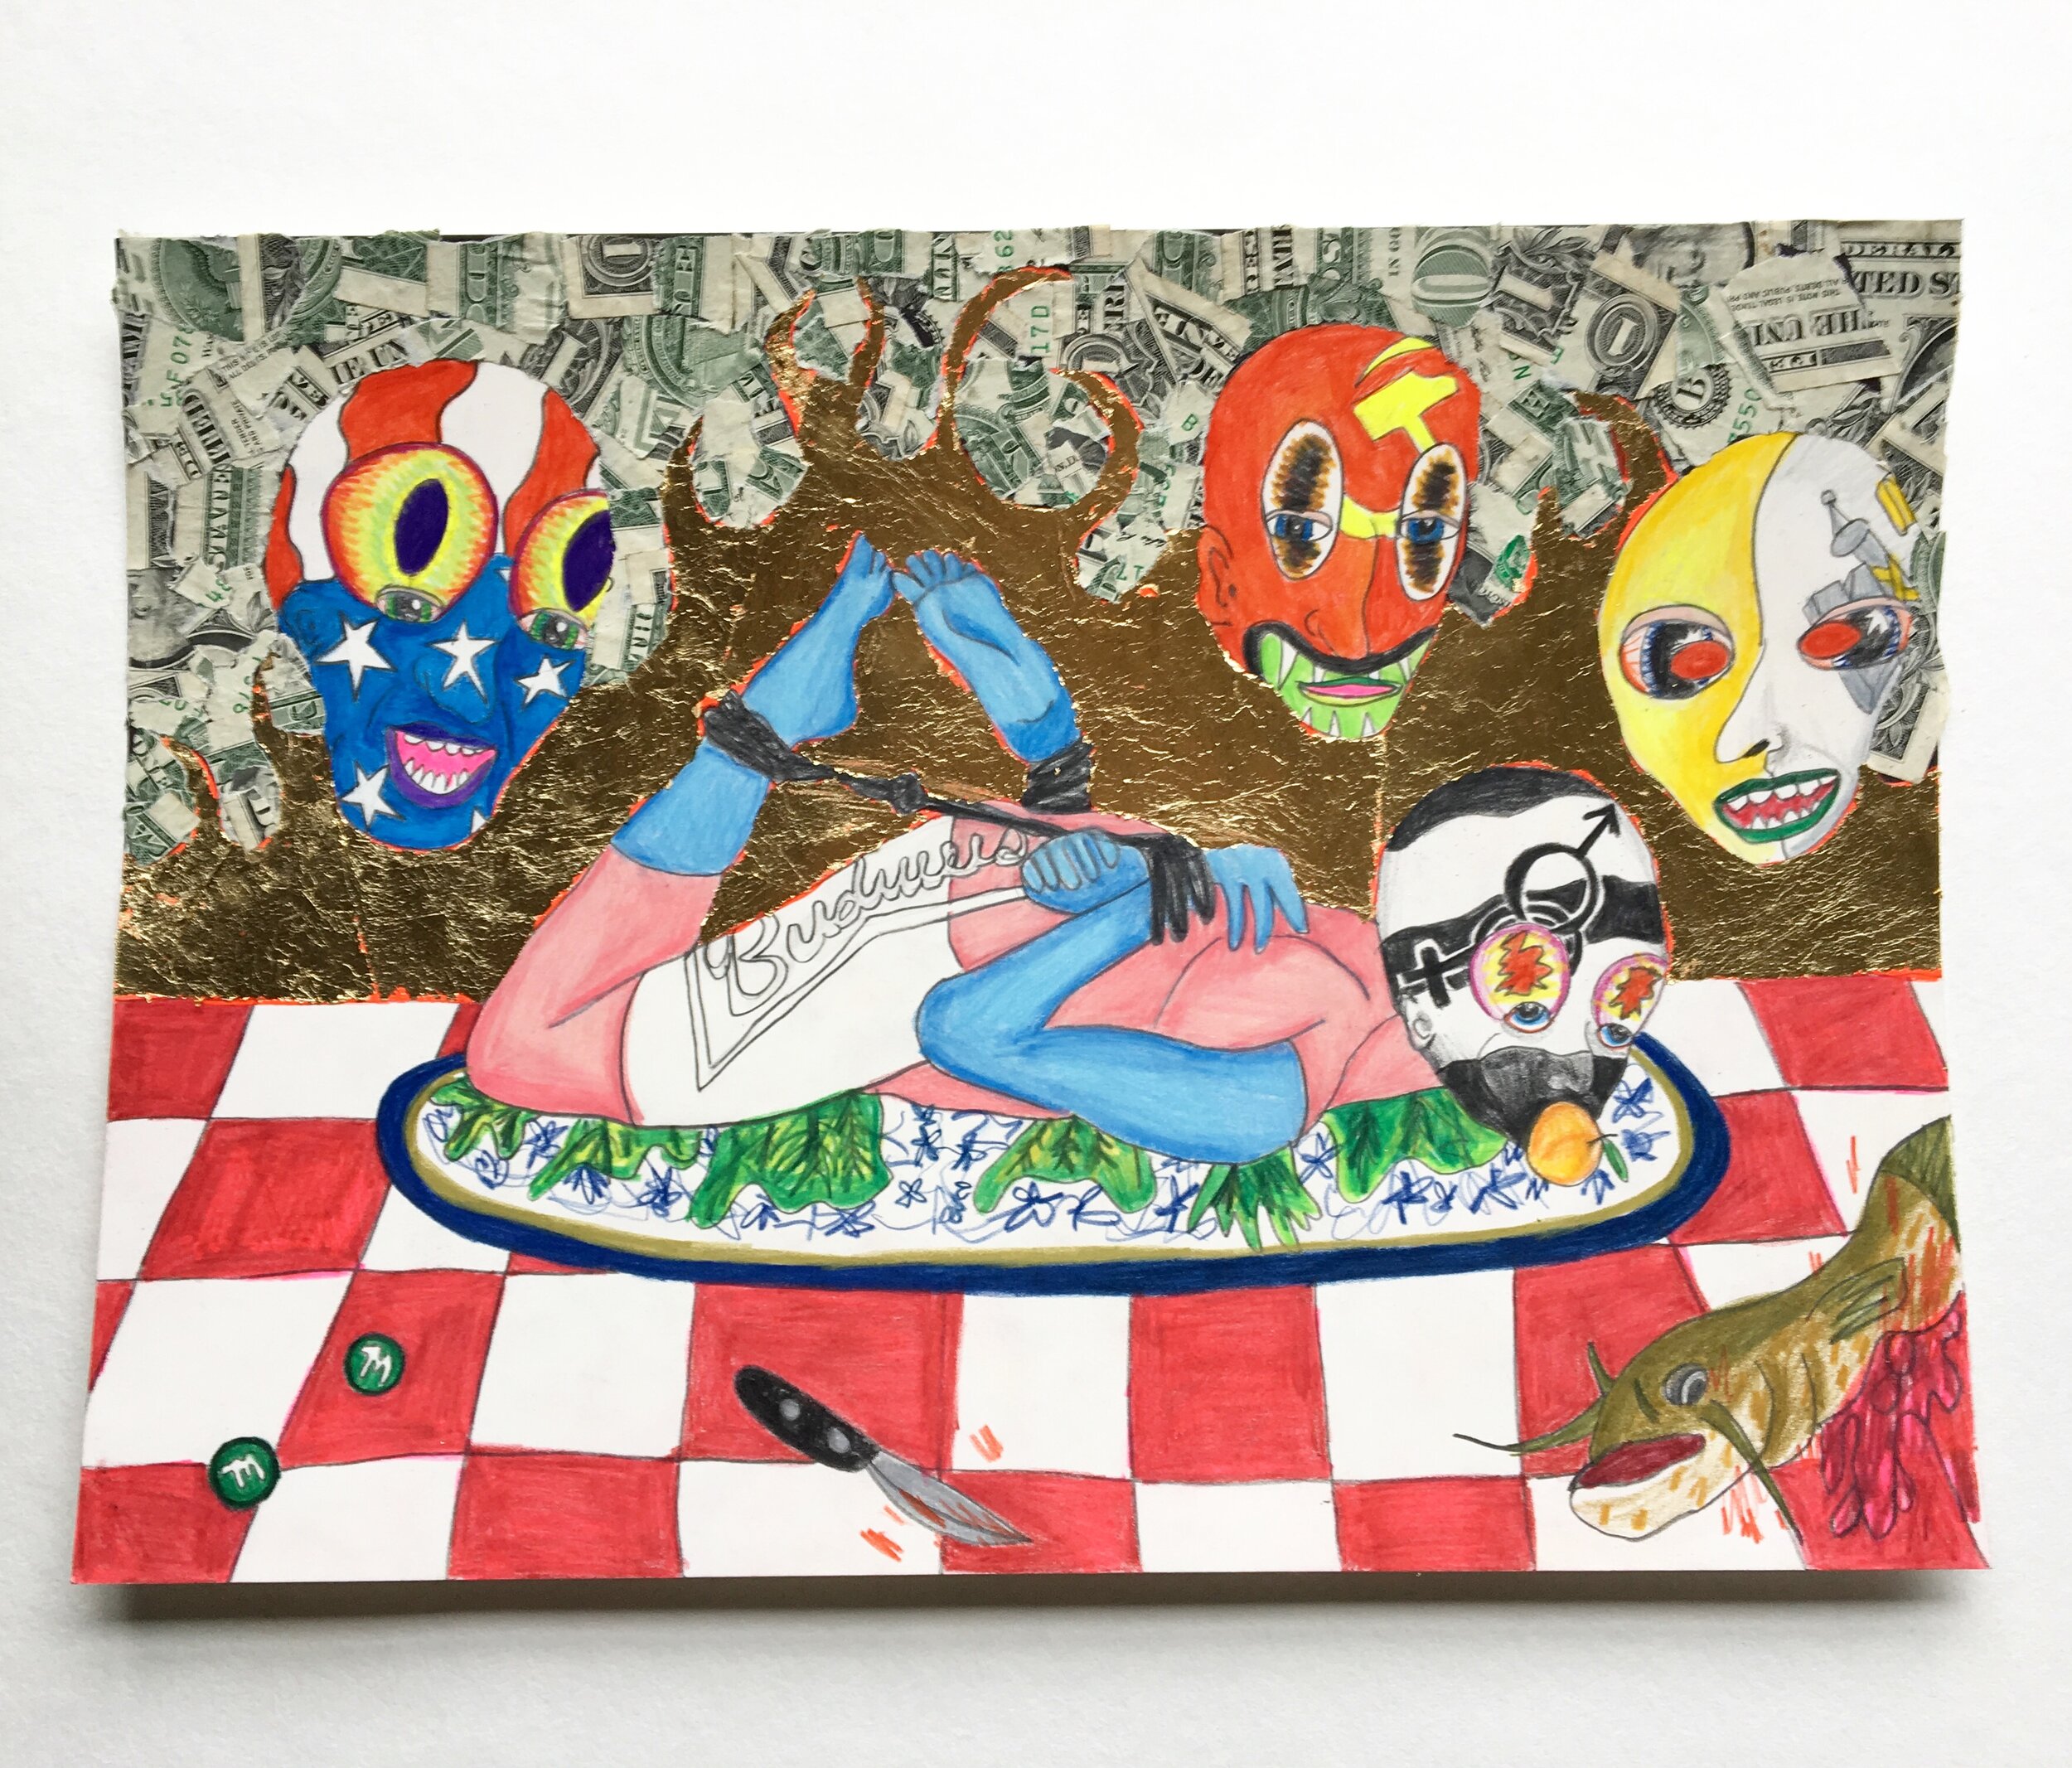  “Laughing Behind the Mask”  Colored pencil, acrylic paint, gold leaf, Modge Podge, dollar bills on paper  2019  Private collection 